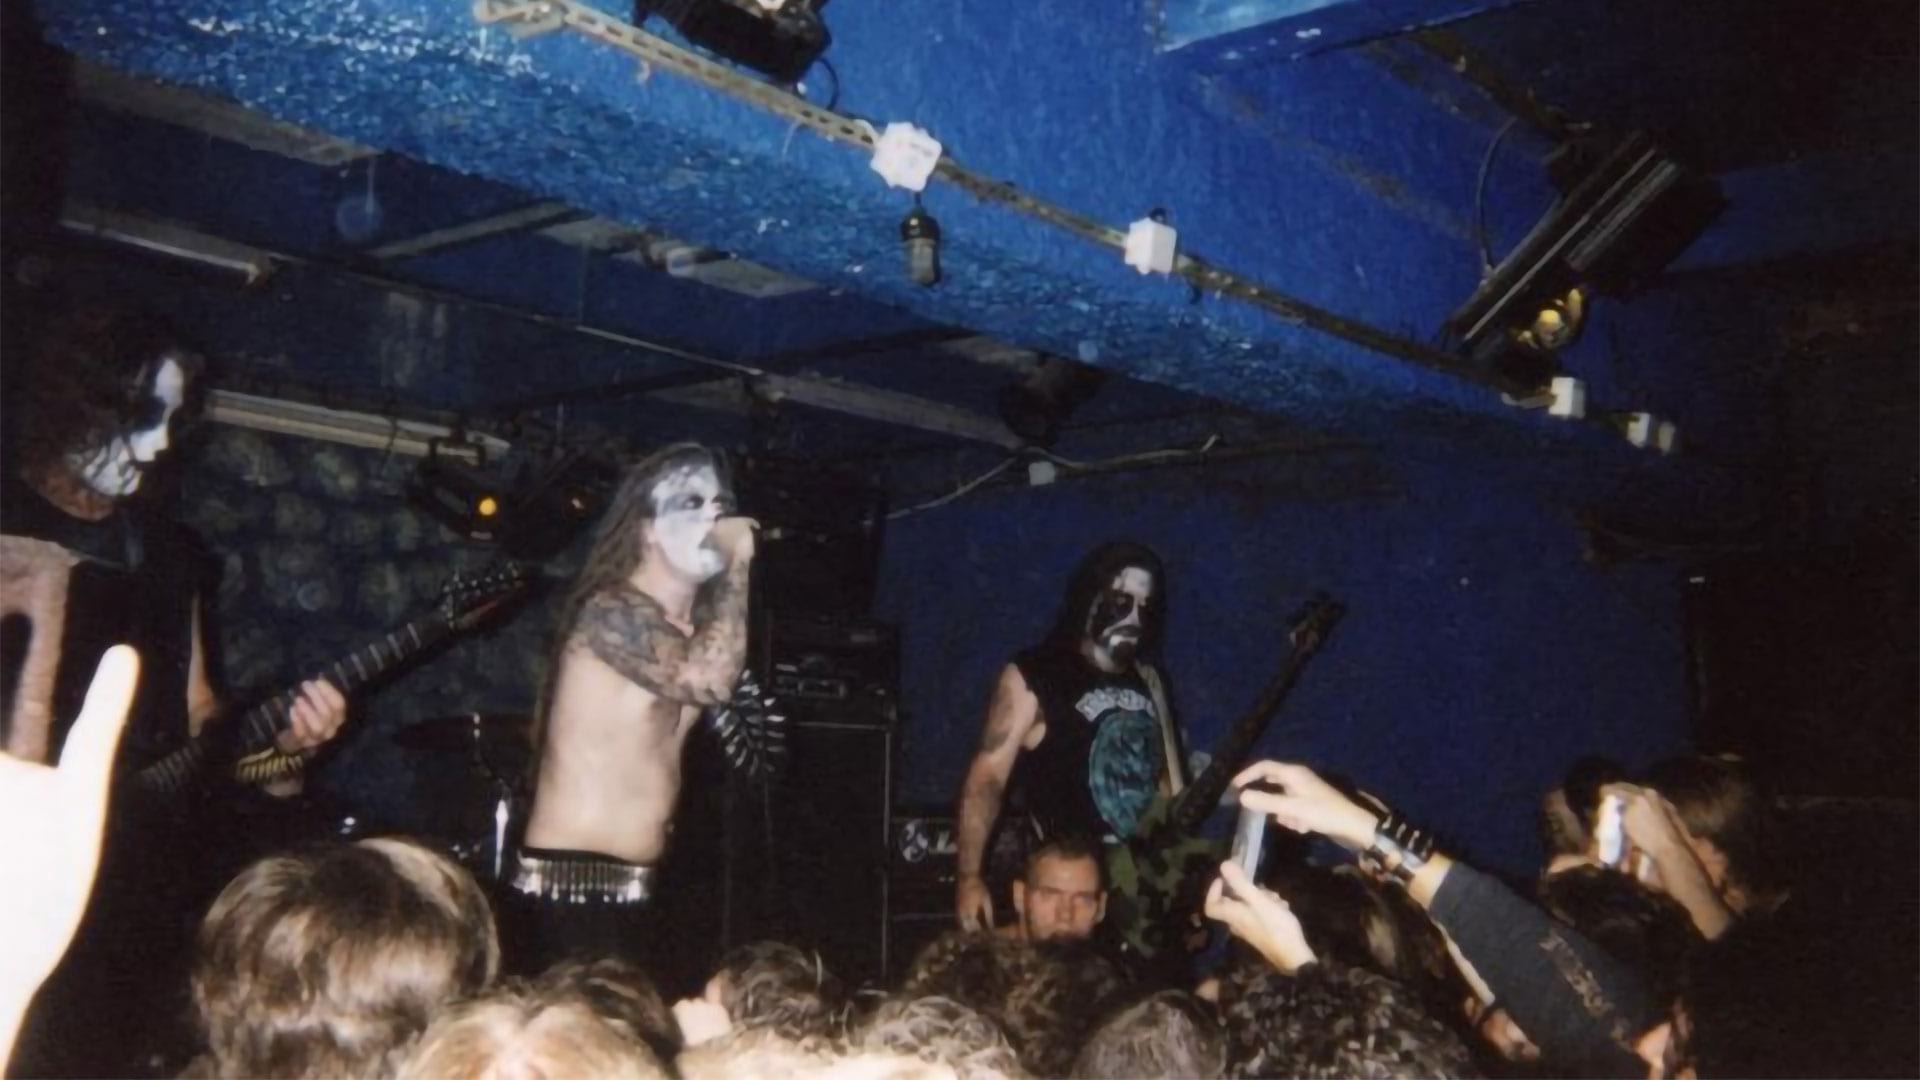 21 Years Ago: MARDUK live in Rotterdam